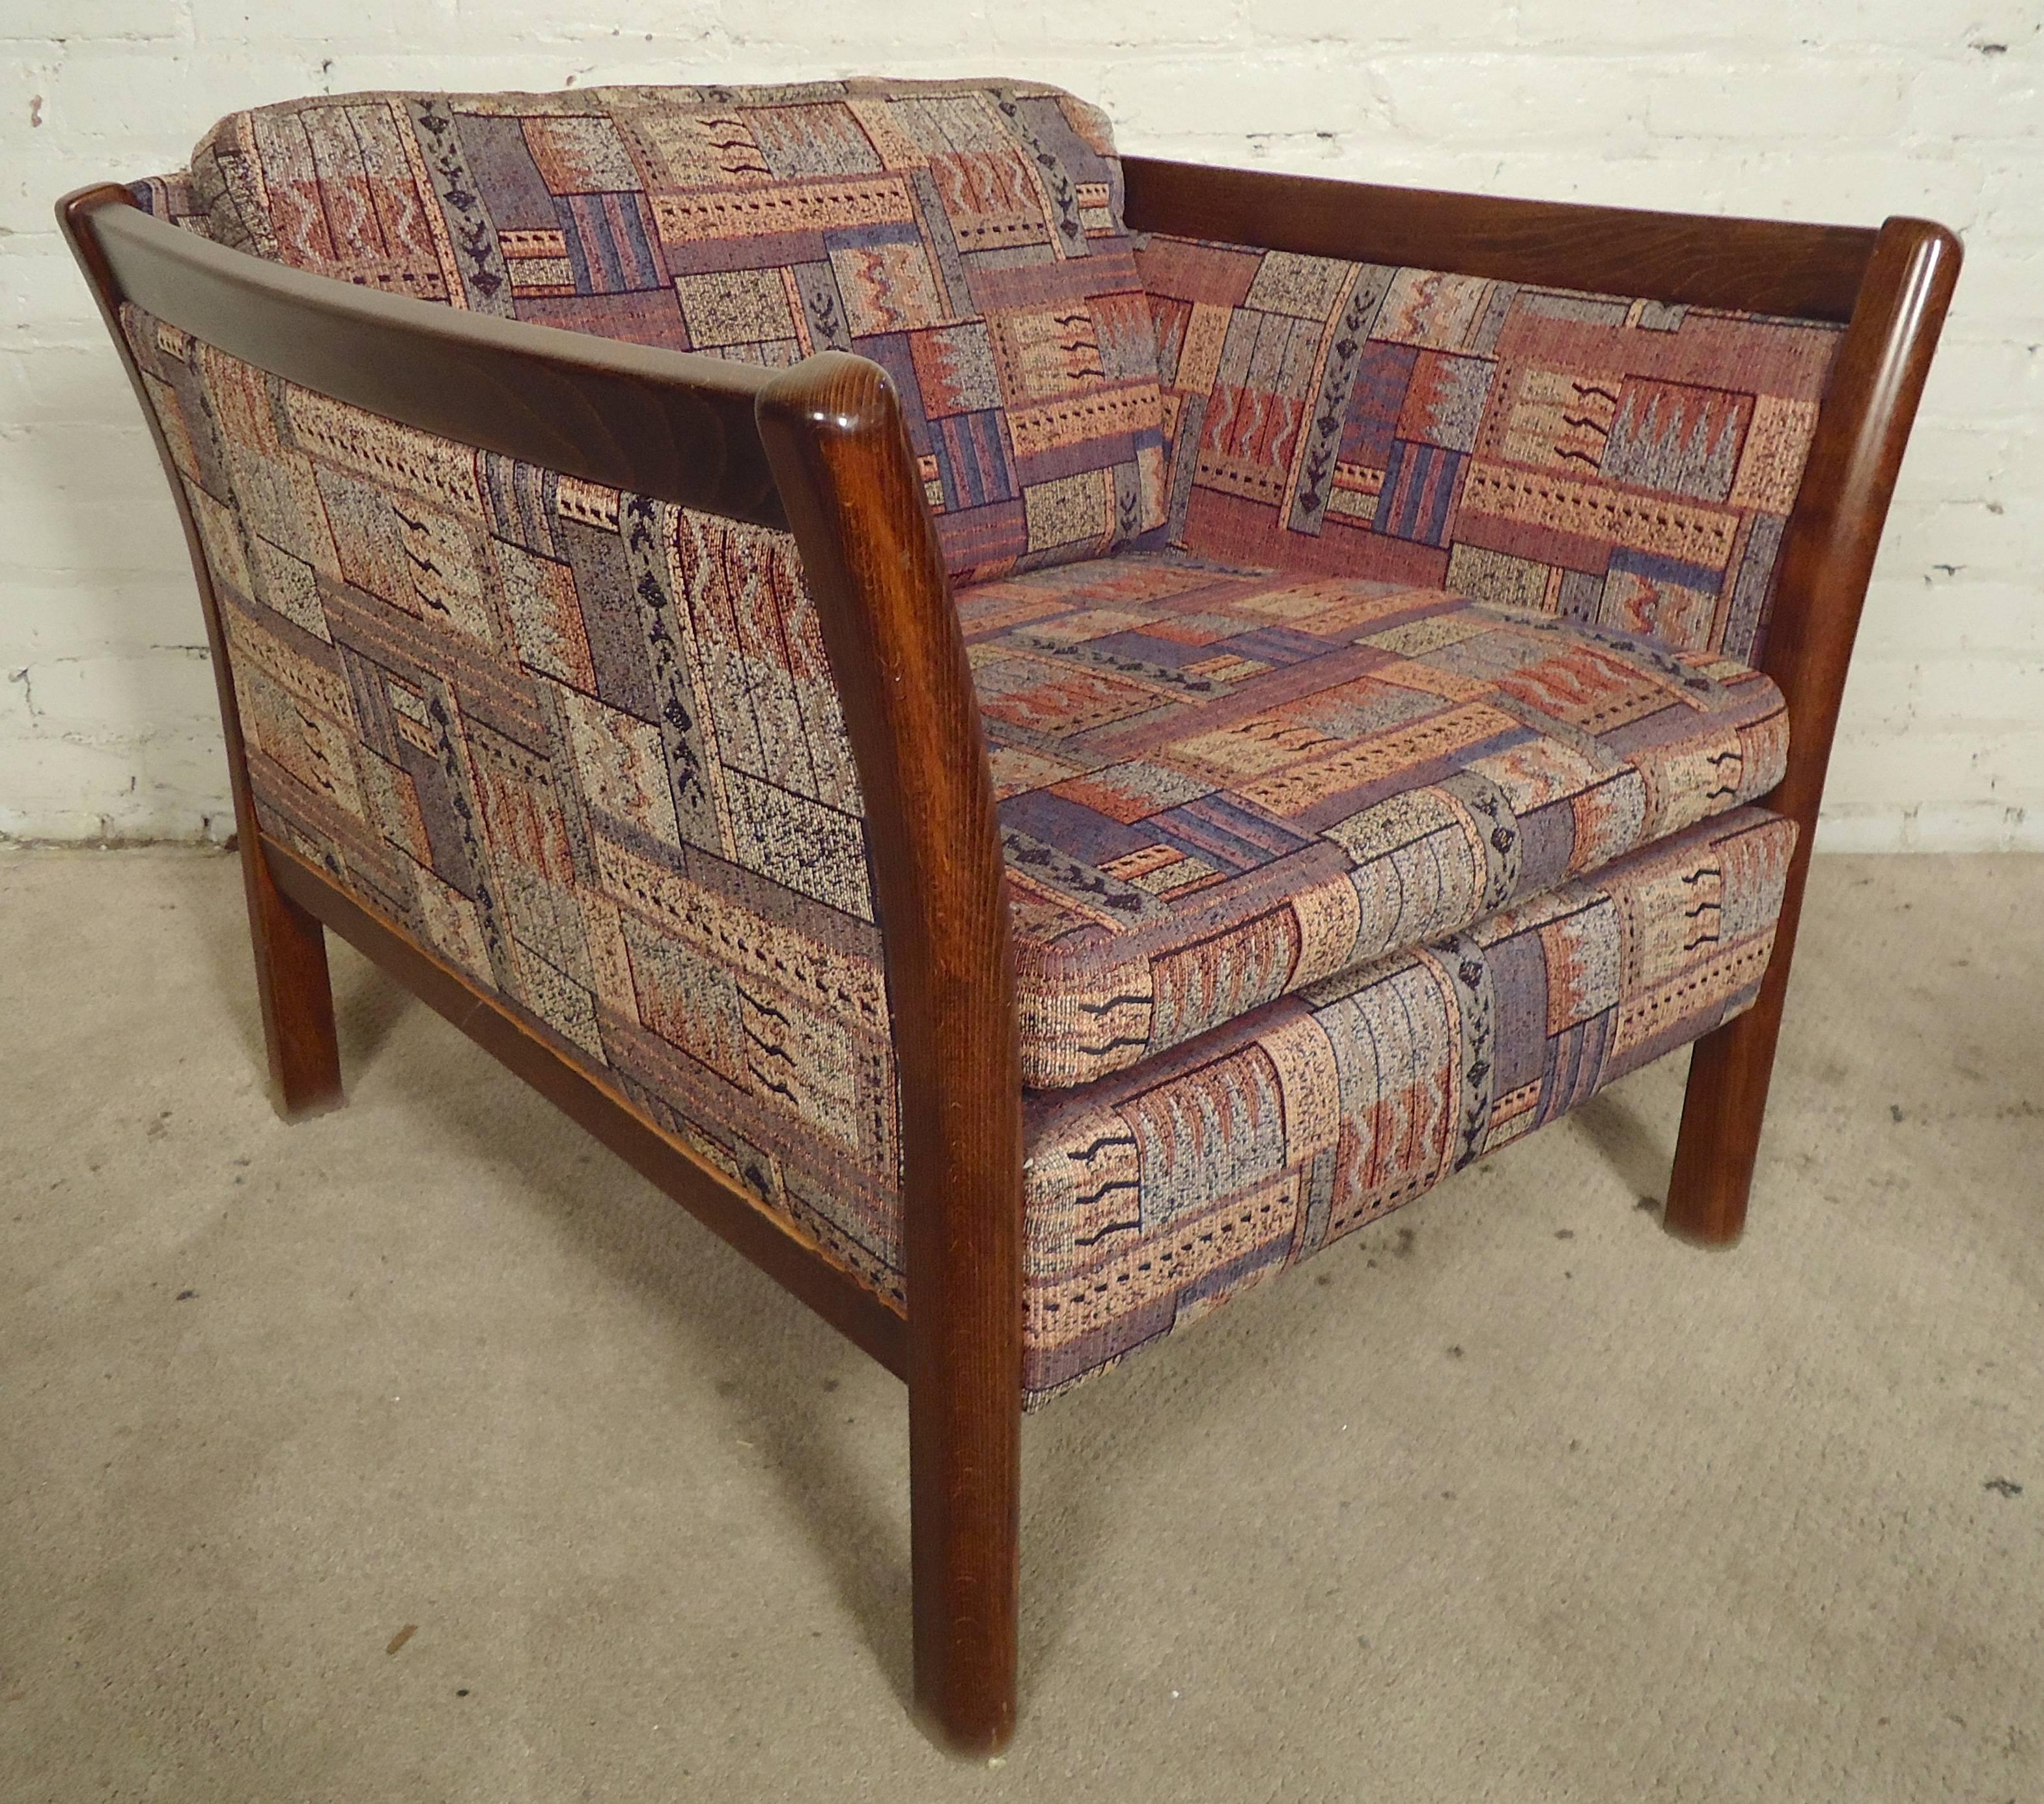 Mid-century modern arm chairs with wood trim and bowed arms. Very comfortable club chairs with vintage upholstery.

(Please confirm item location - NY or NJ - with dealer)
